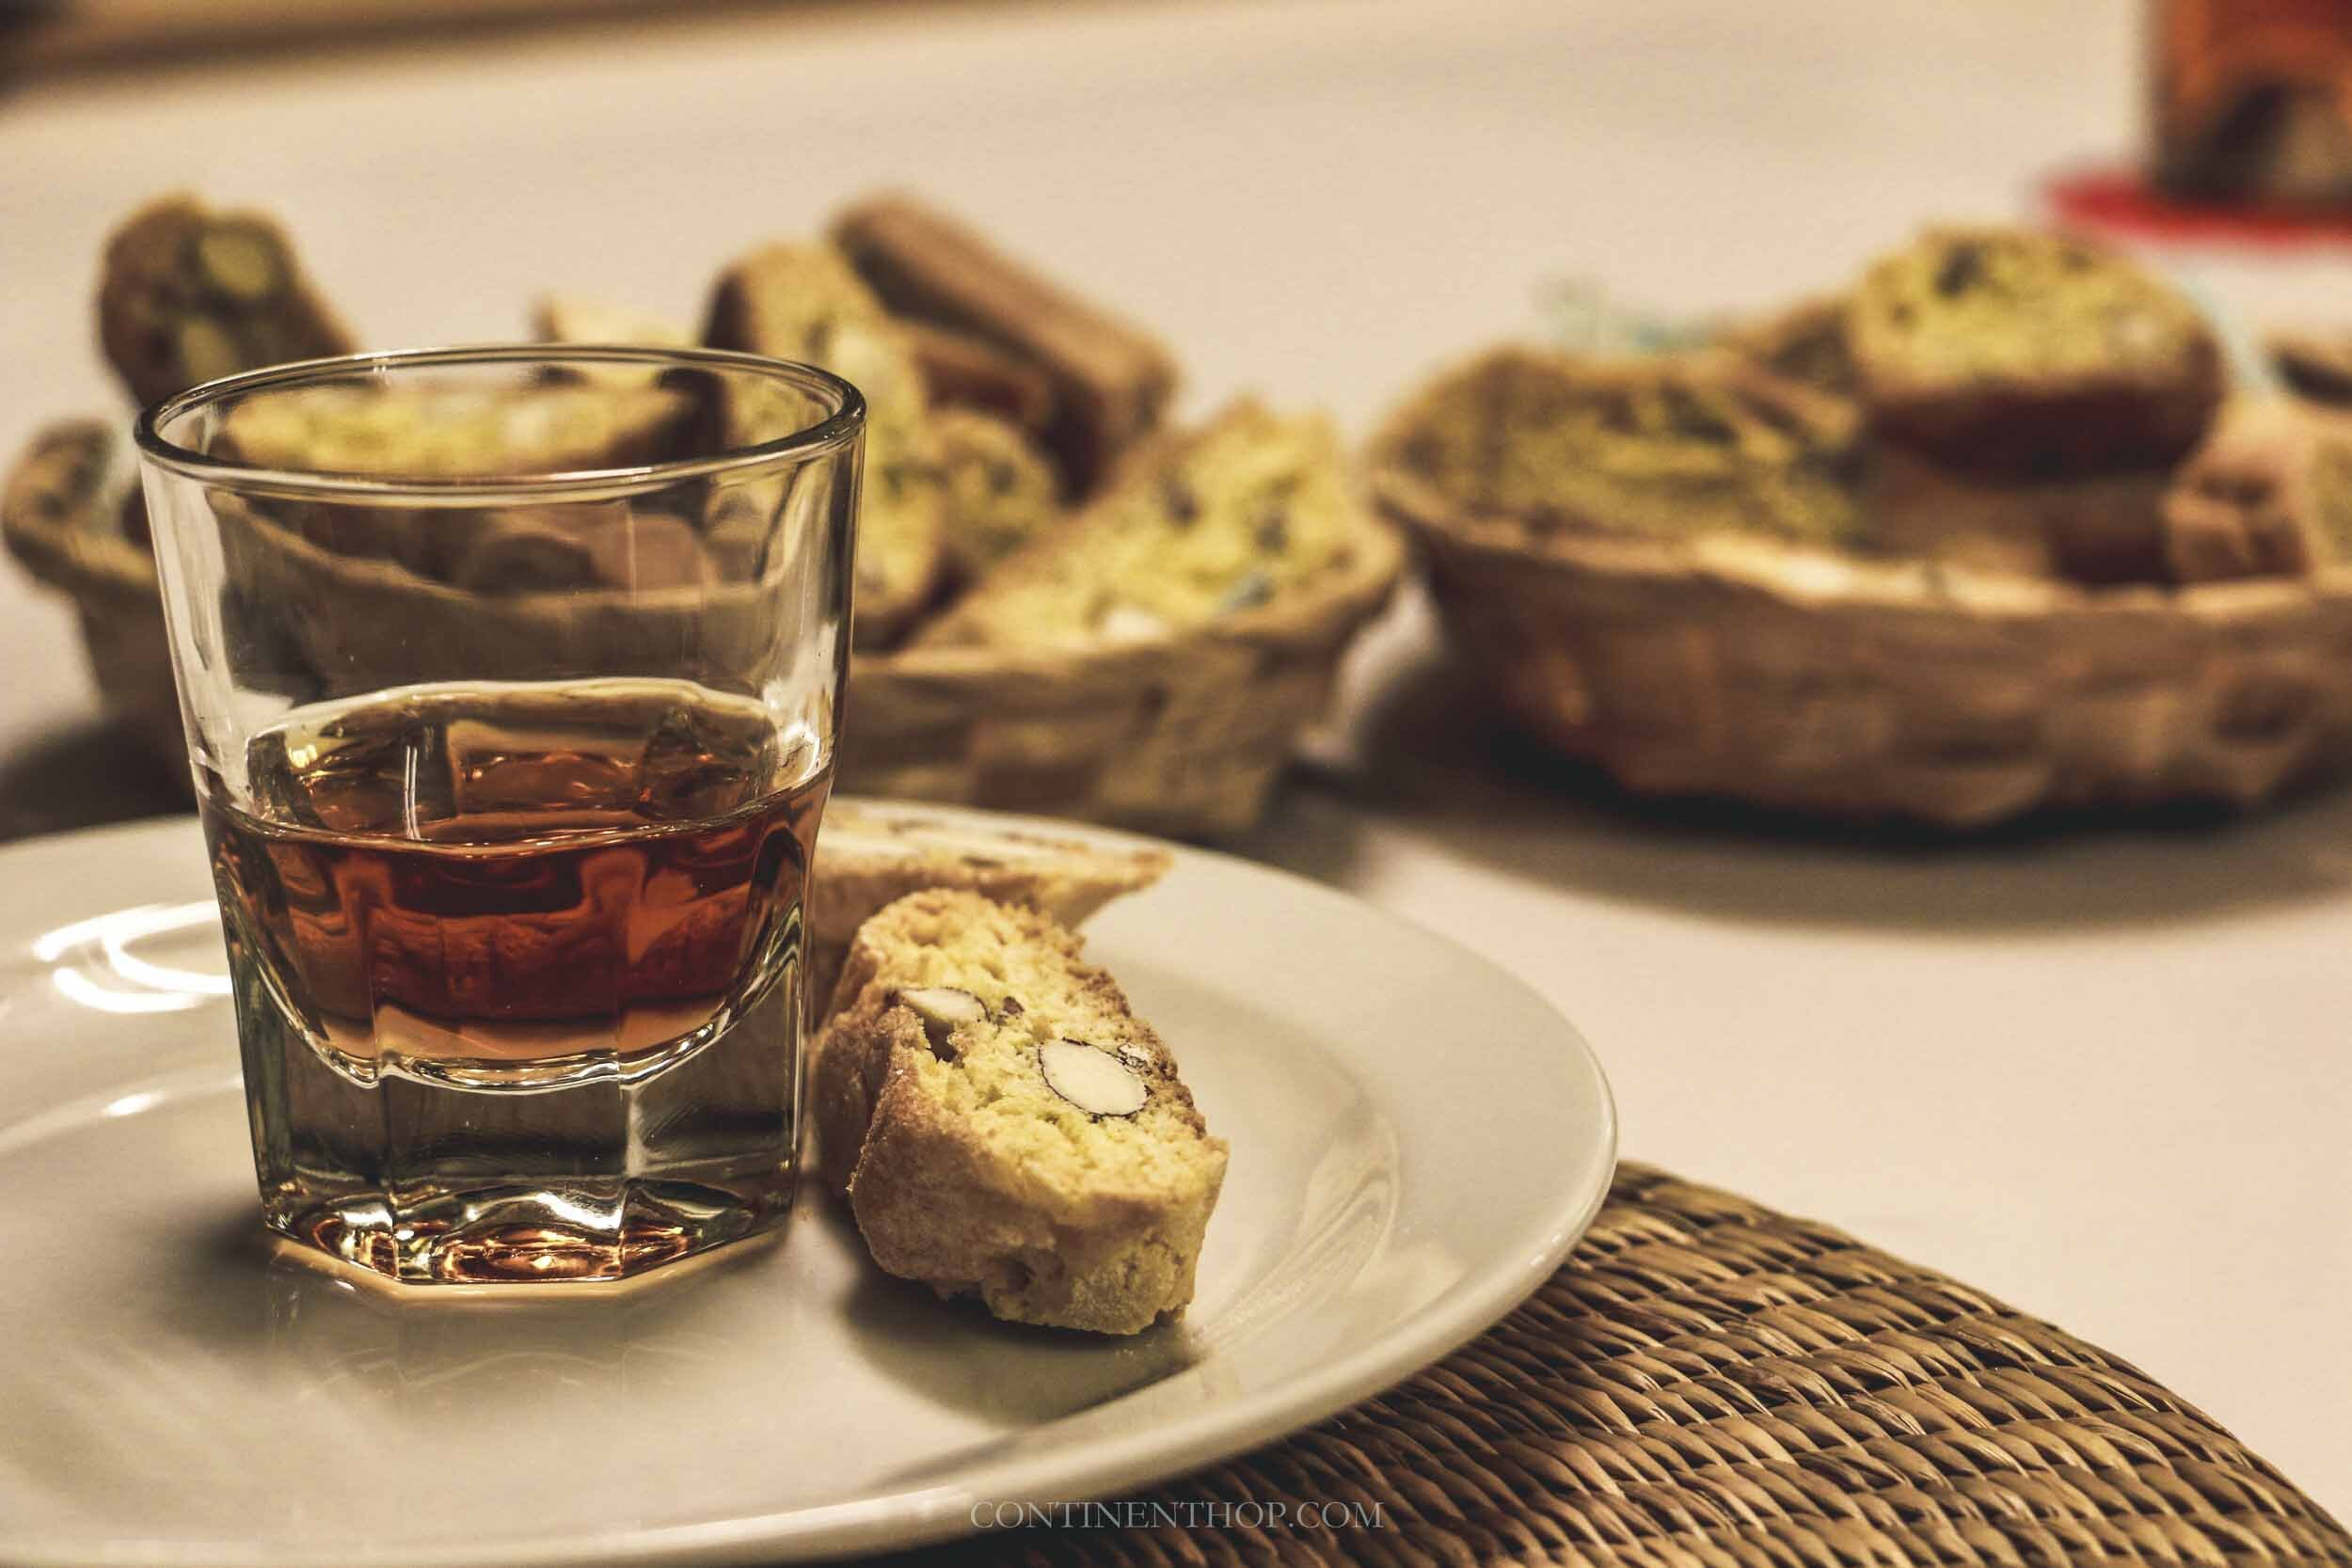 tuscany product cantucci biscuit served with vinsanto wine on a agritourism Siena Tuscany tour